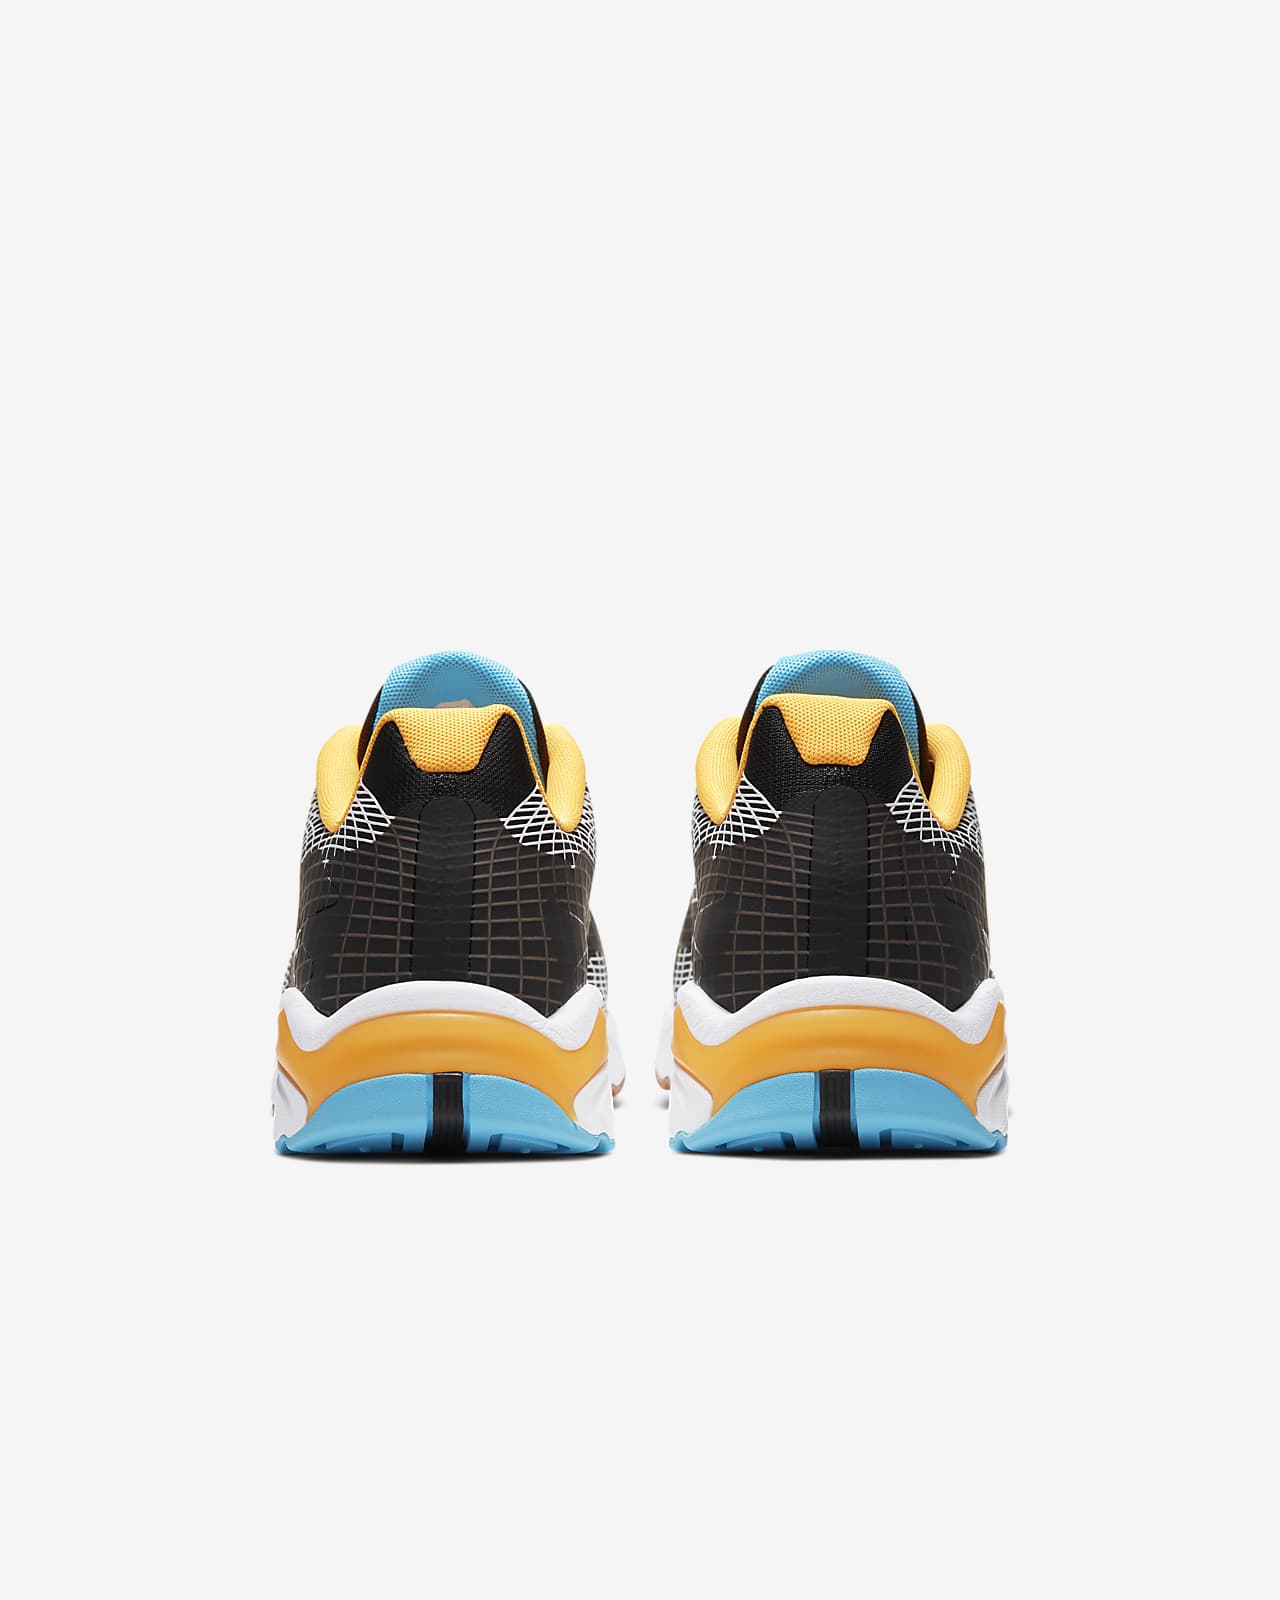 blue yellow and black nike shoes